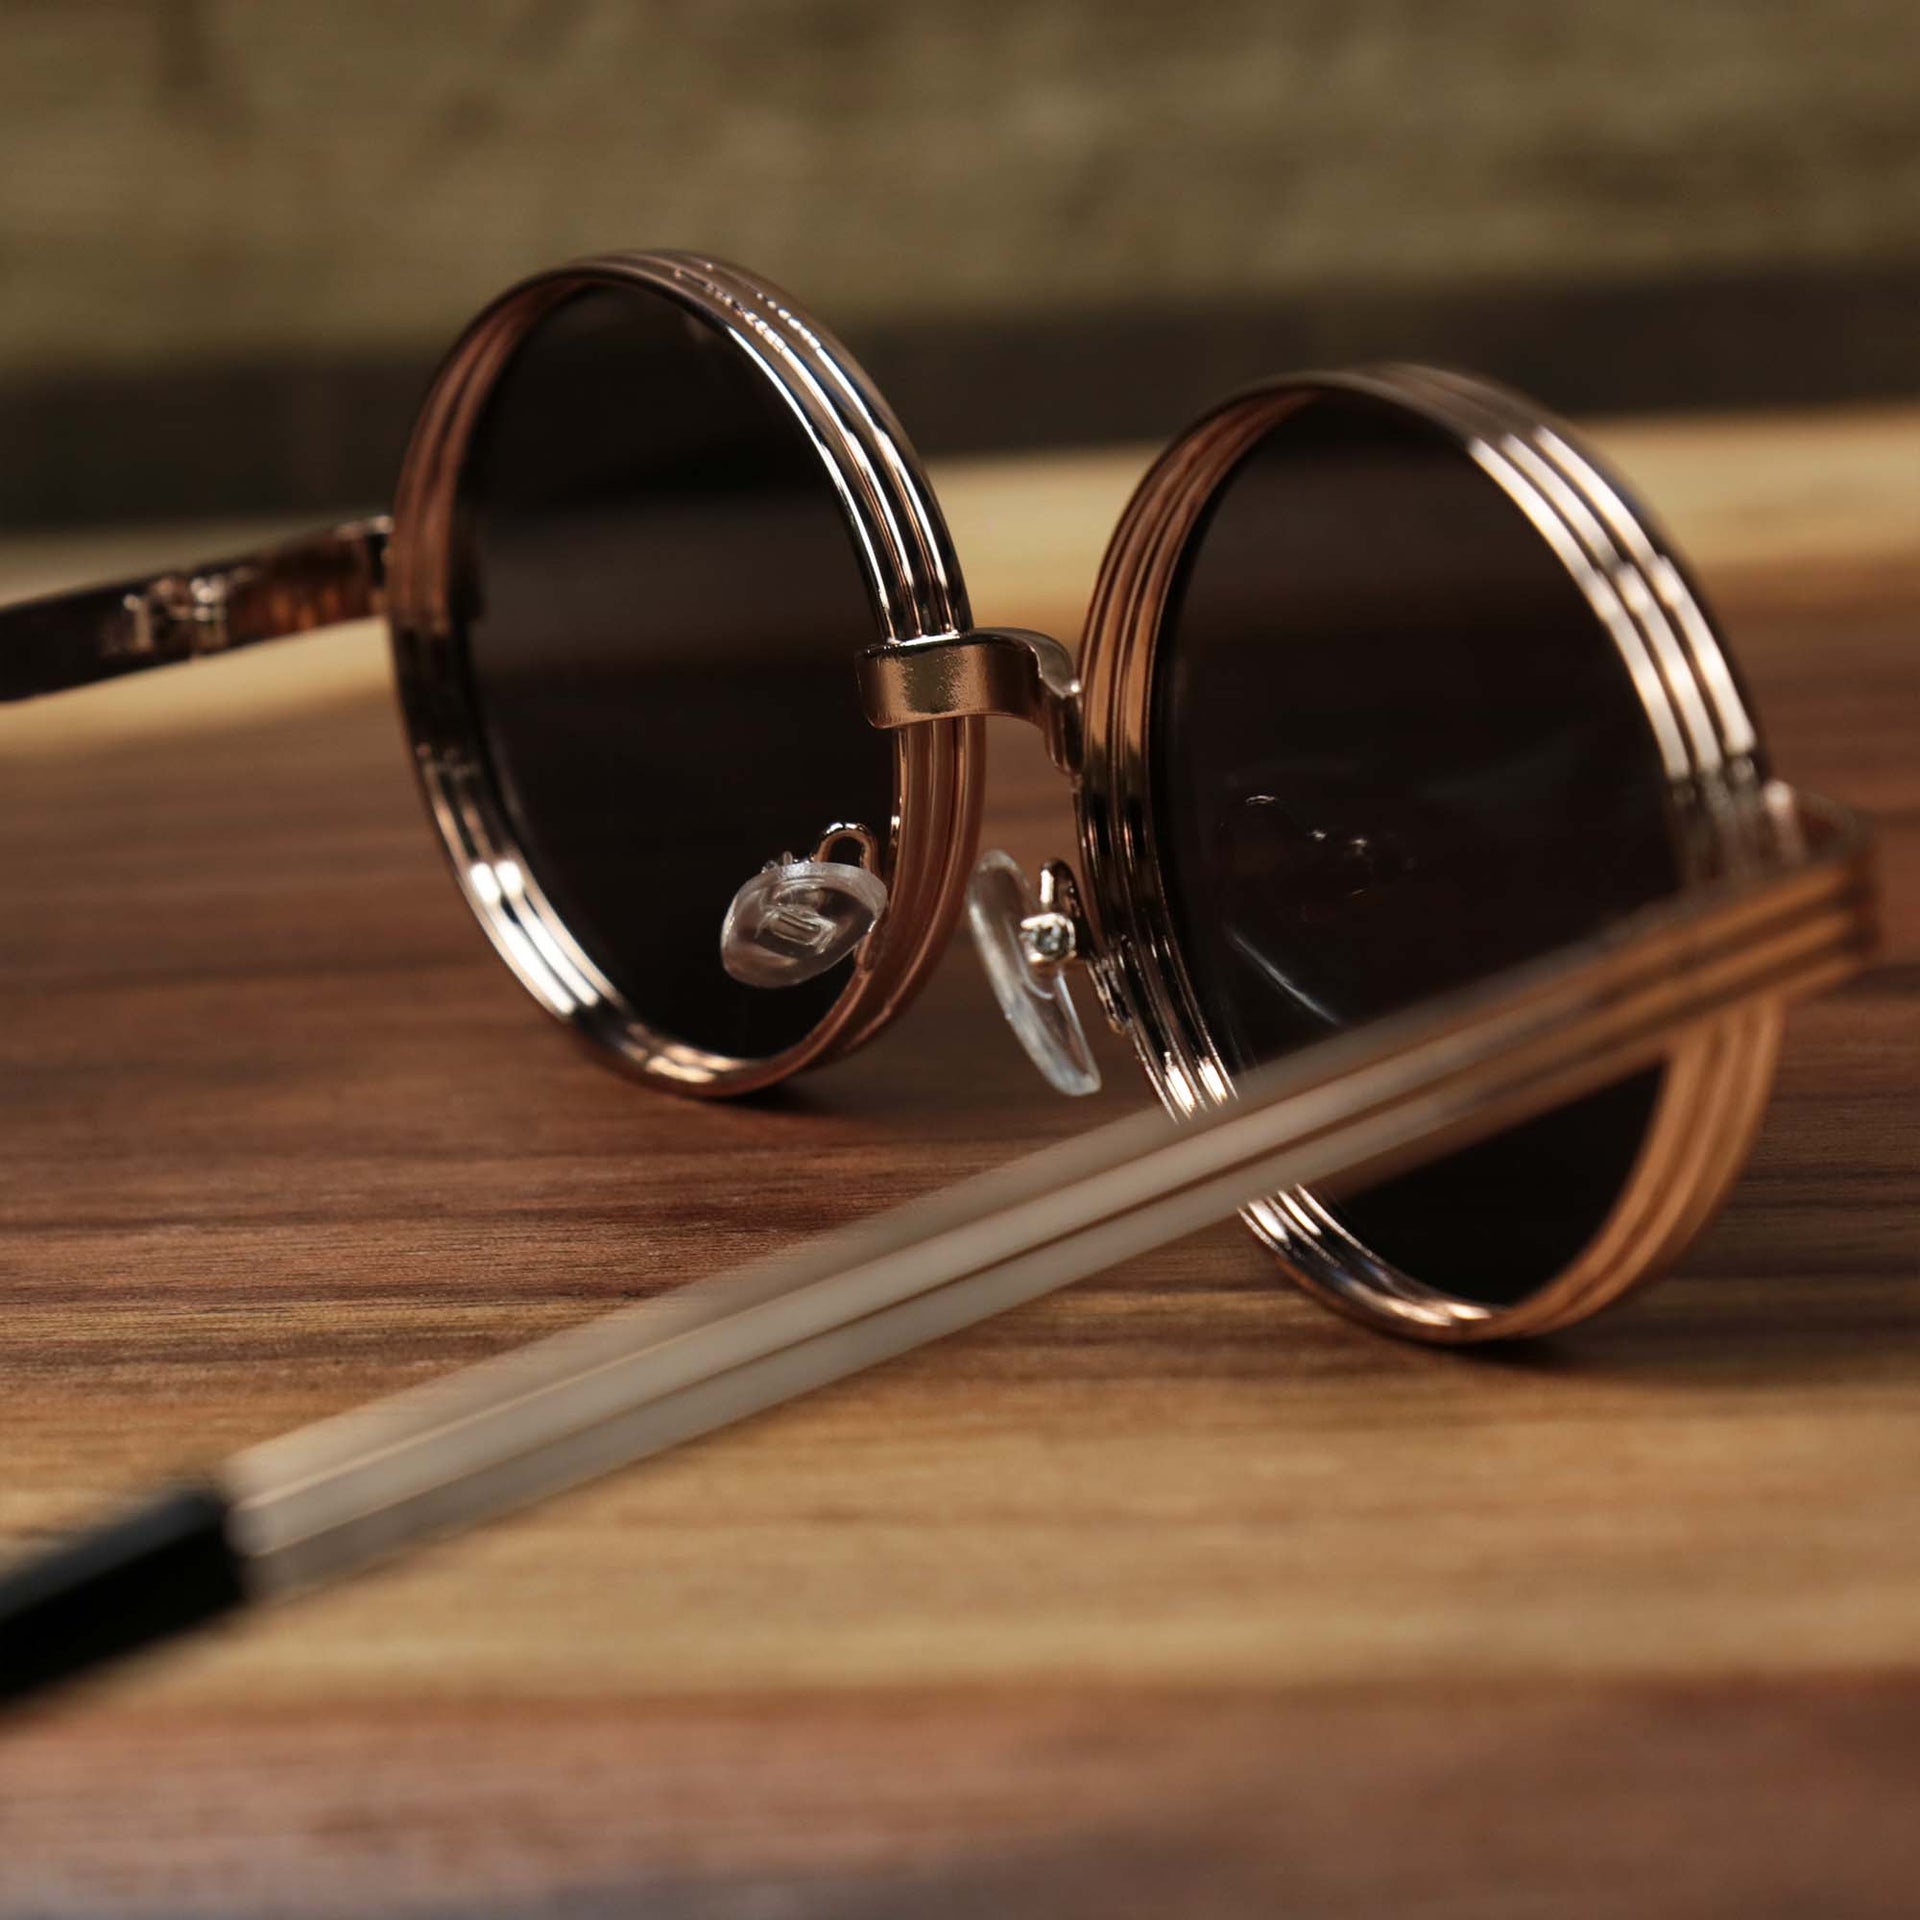 The inside of the Round 3 Row Frame Black Lens Sunglasses with Rose Gold Frame